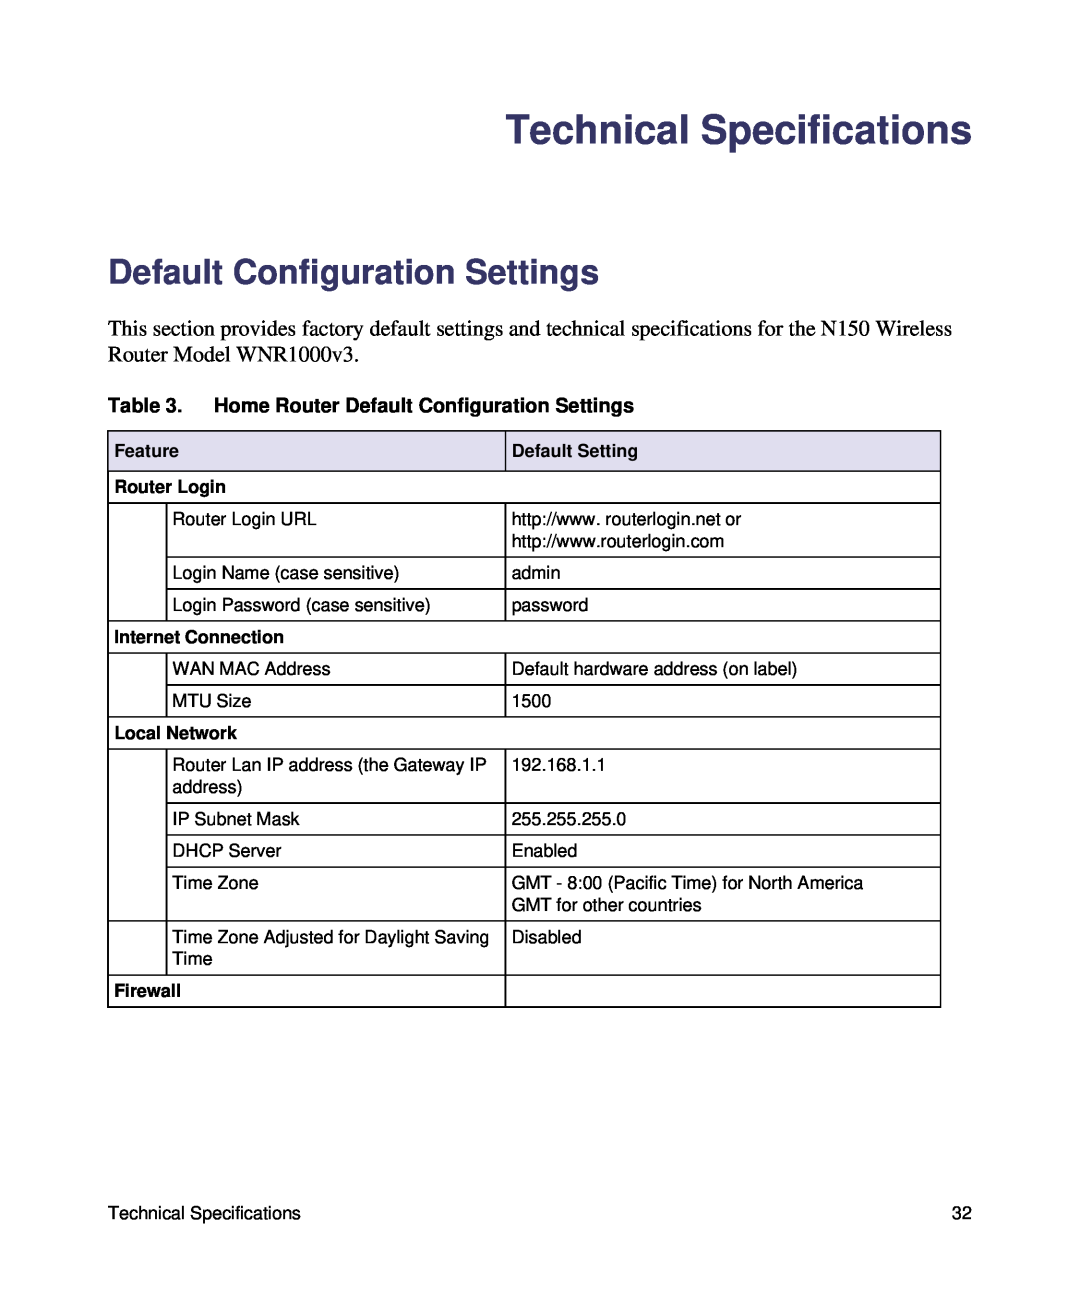 NETGEAR N150 Technical Specifications, Home Router Default Configuration Settings, Feature, Default Setting, Firewall 